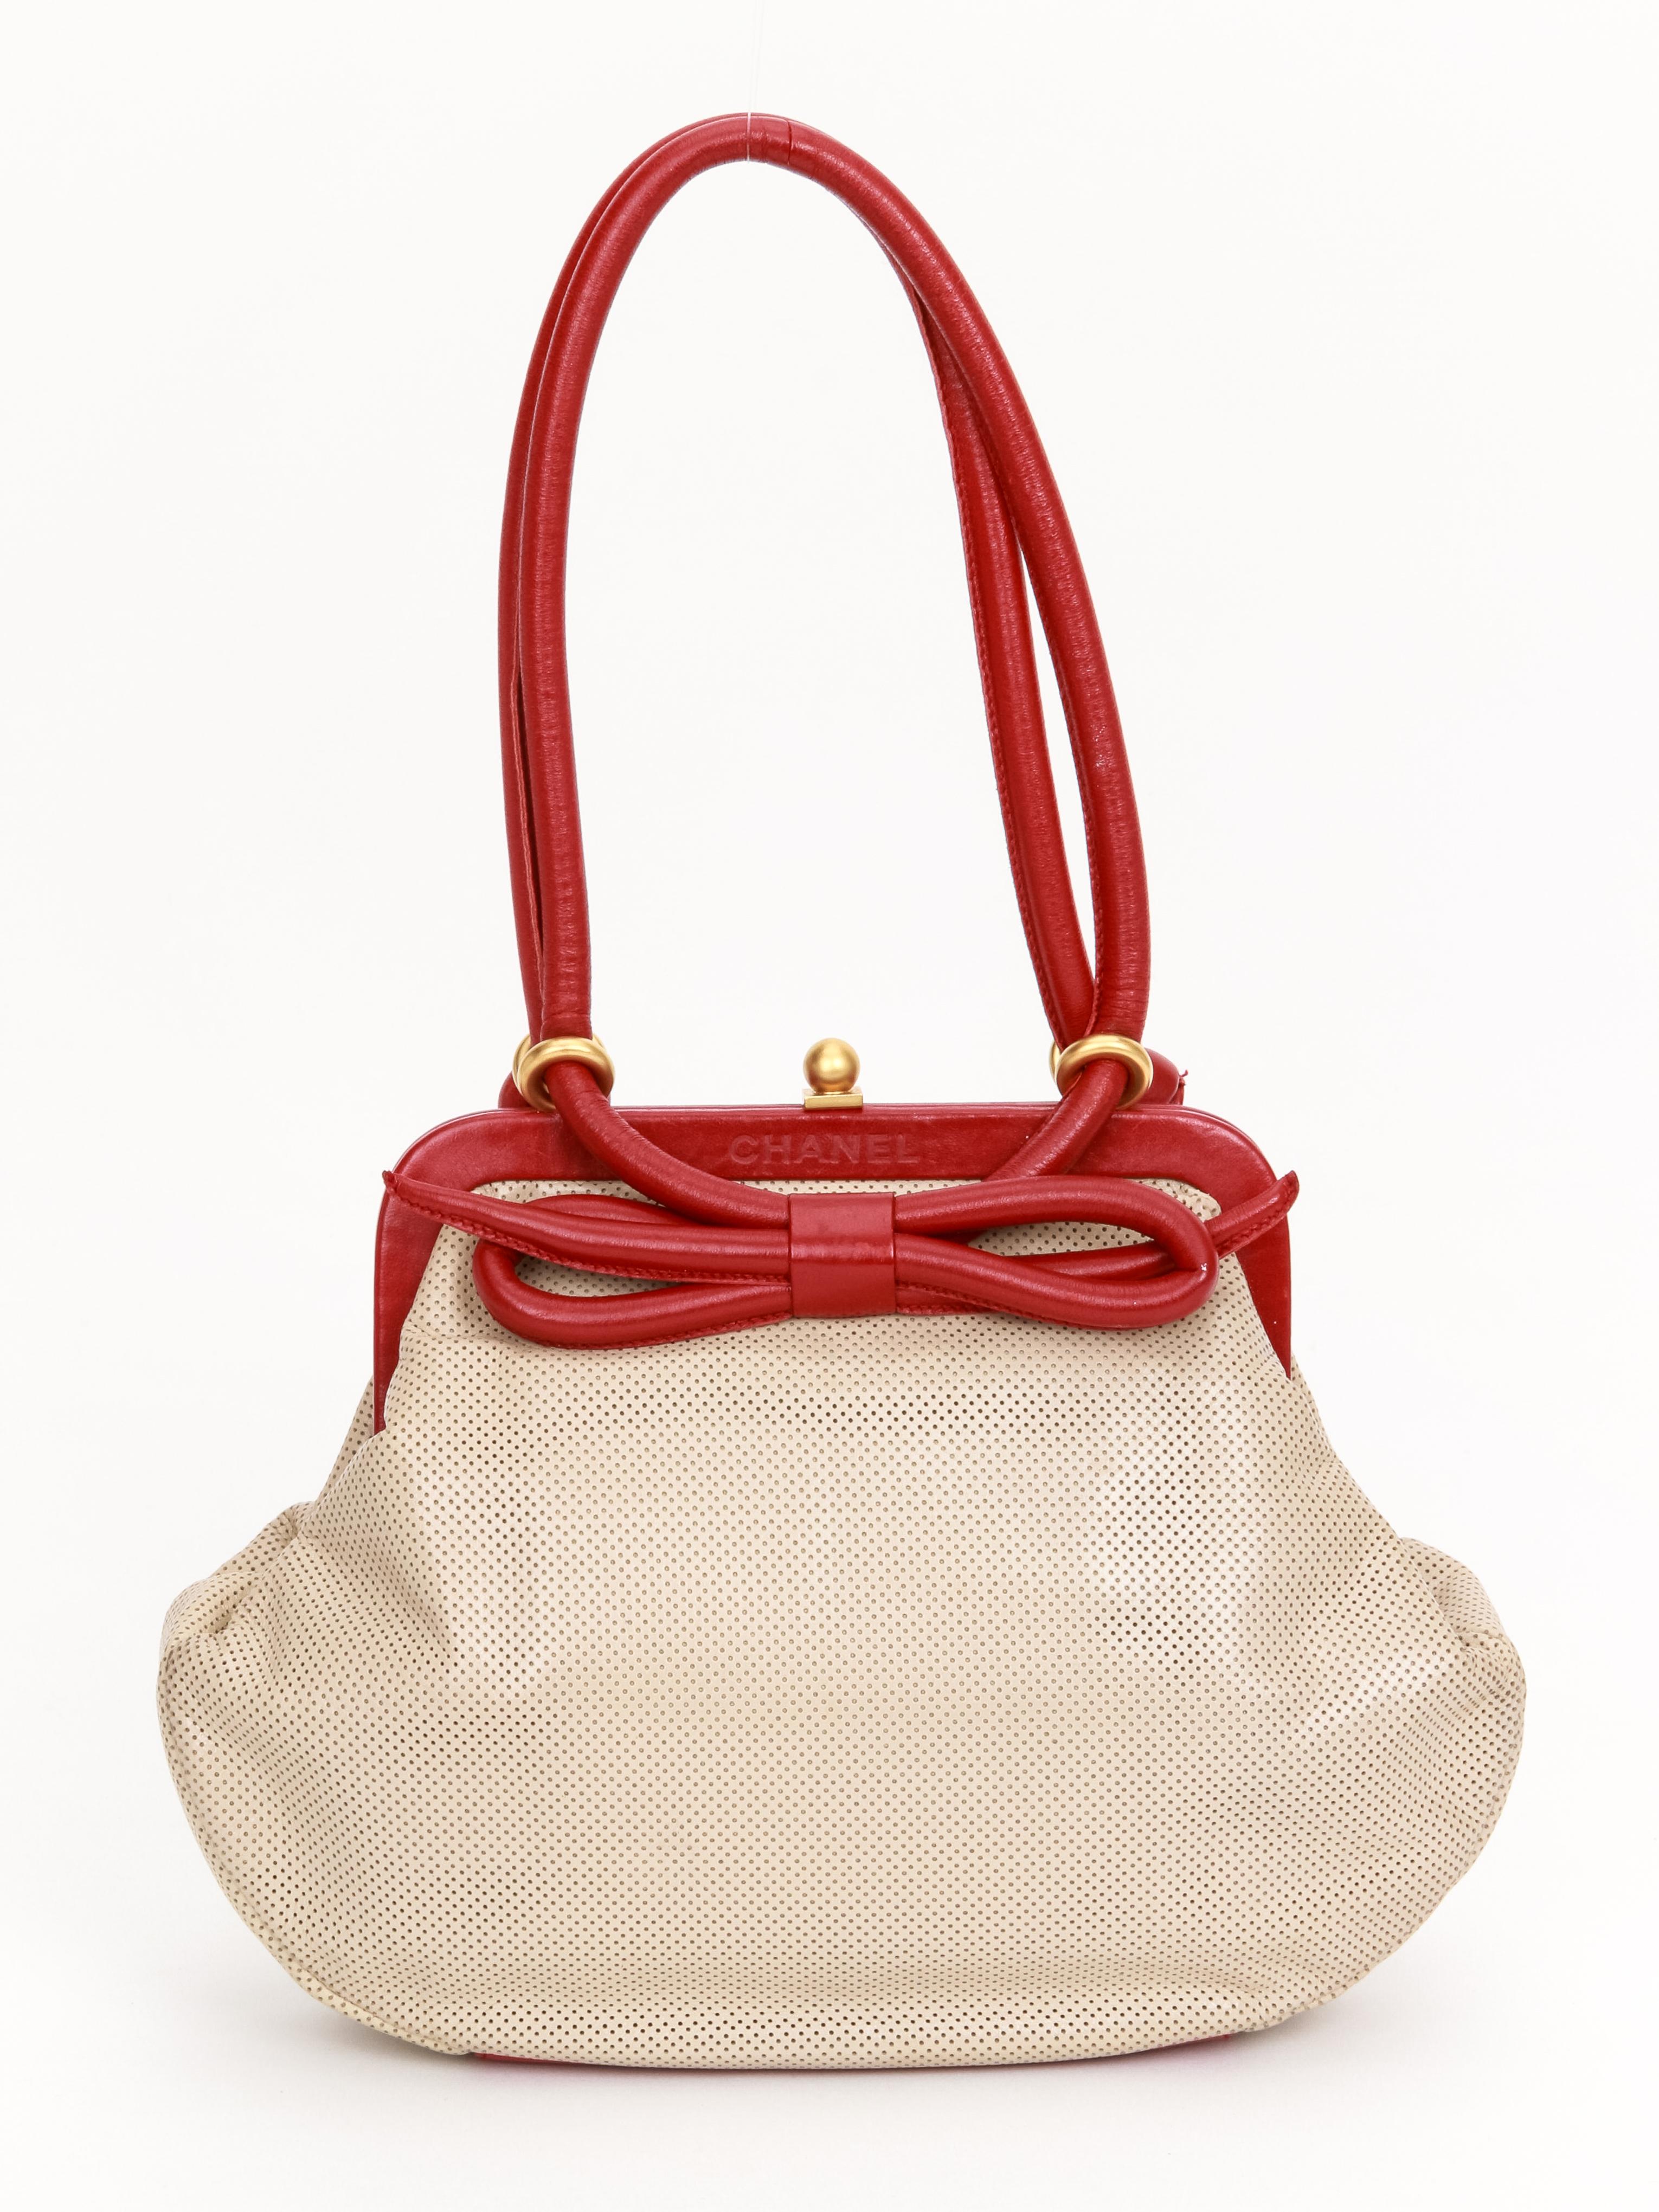 Chanel 90s beige perforated vintage bag in beige perforated leather and red leather trimming. Front center bow, satin gold hardware. Shoulder drop 8